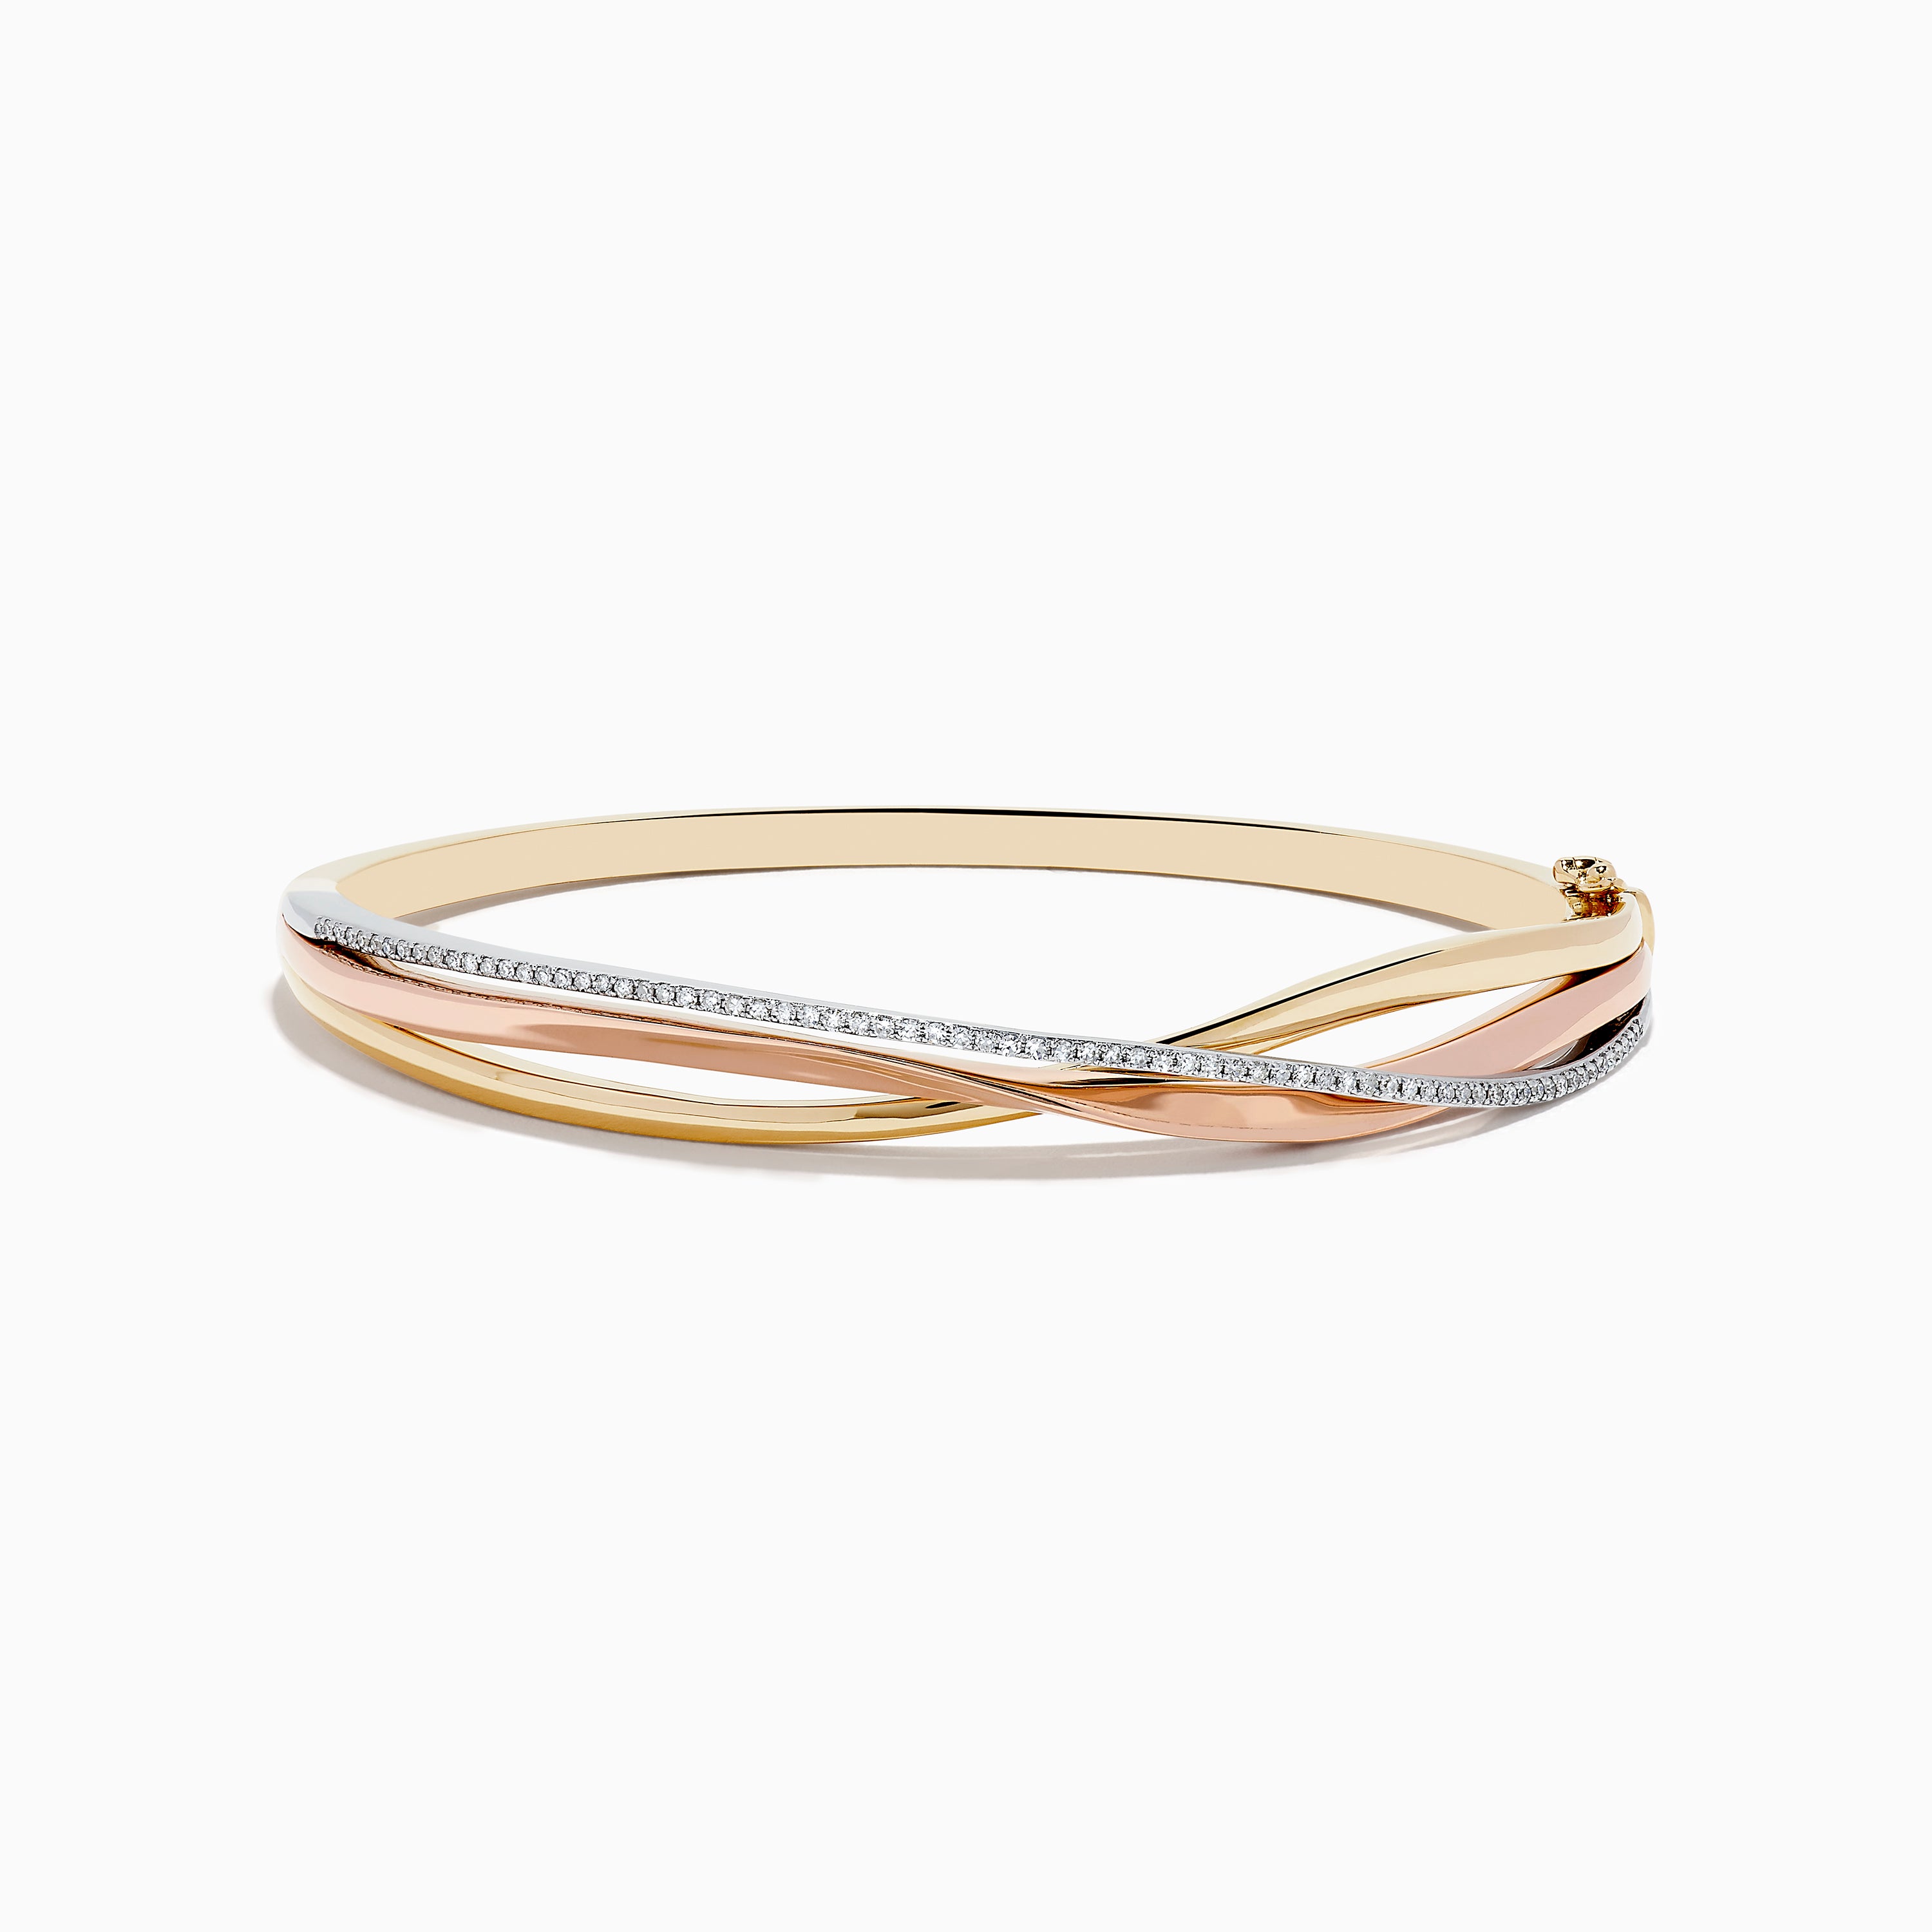 9ct Three Colour Gold Bar Bracelet - 7.5in - G6453 | Chapelle Jewellers